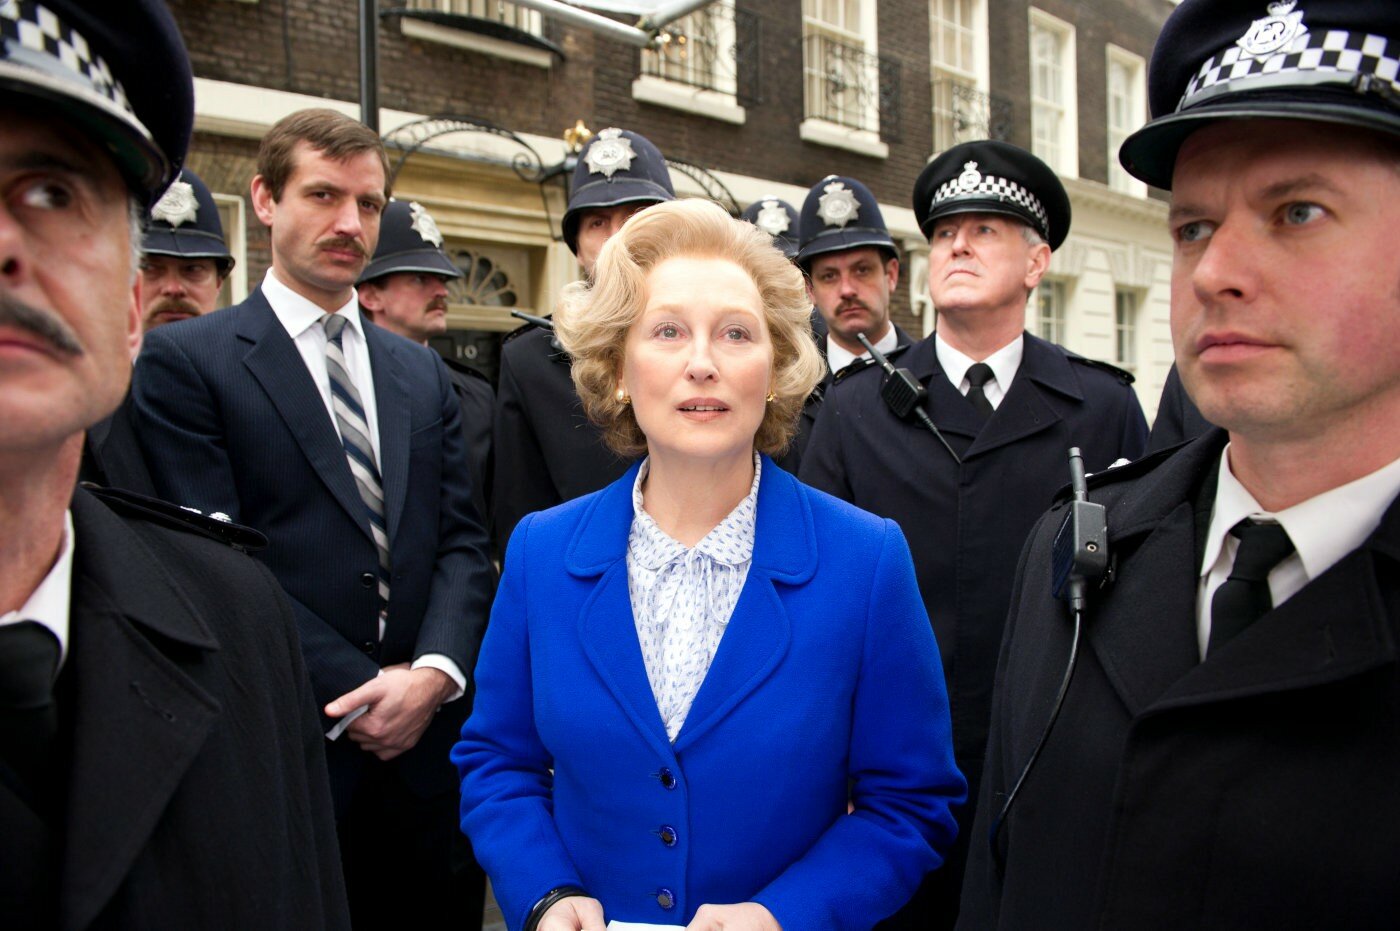 Thatcher (Meryl Streep) flanked by her police entourage. Image: 20th Century Fox